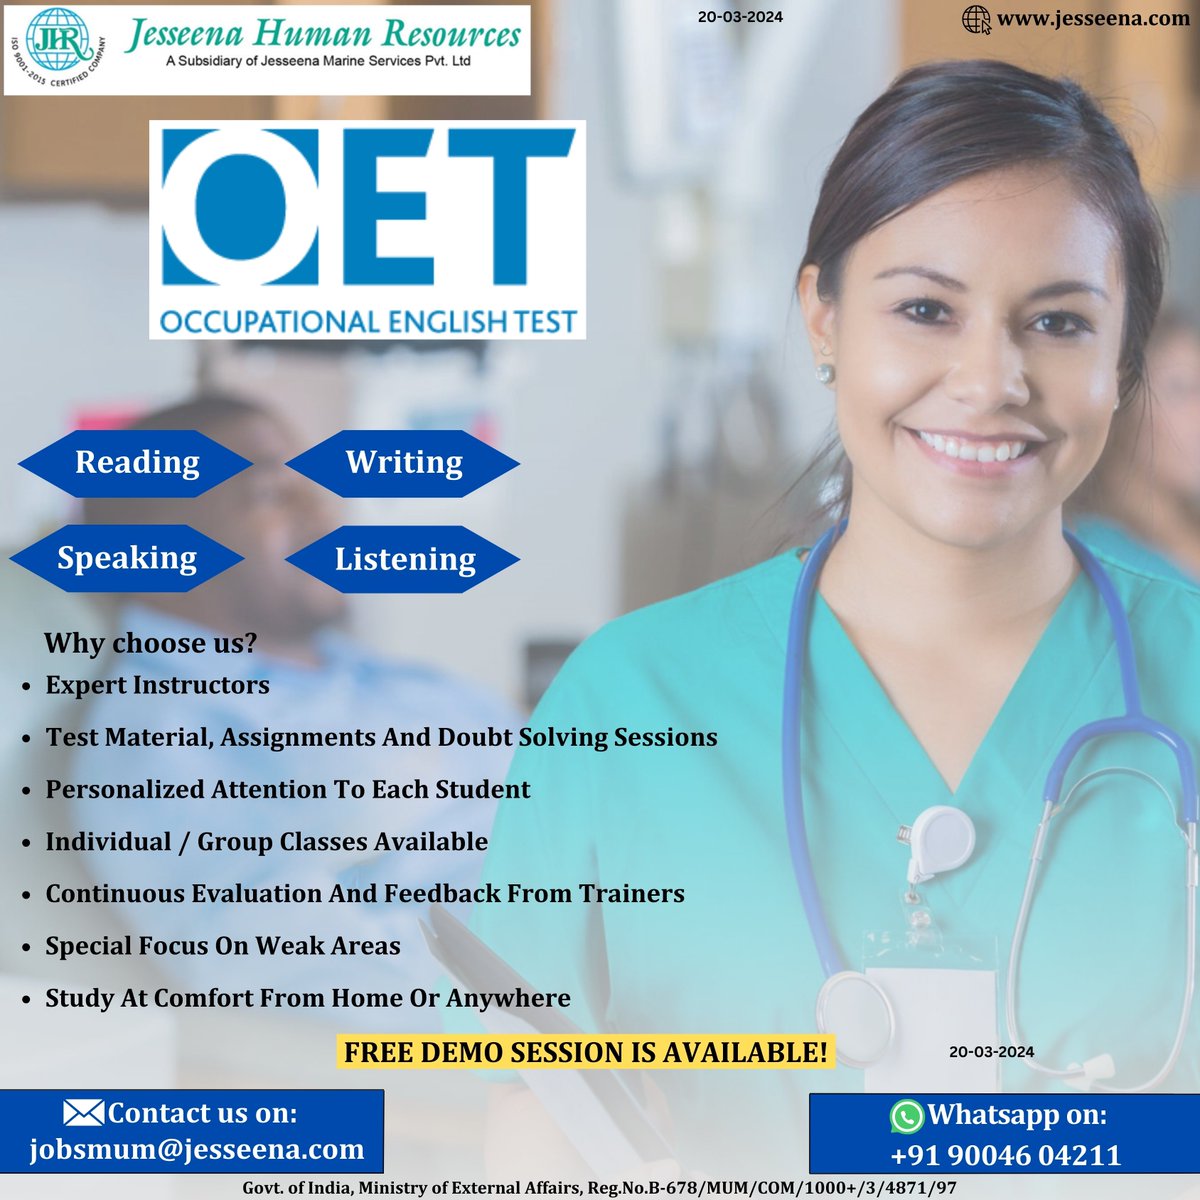 OET Online Classes

Contact us on:
jobsmum@jesseena.com

#oetOnlineClasses #oetPreparation #reading #writing #speaking #listening #testMaterial #personalizedAttention #individualClasses #groupClasses #continuousEvaluation #feedback